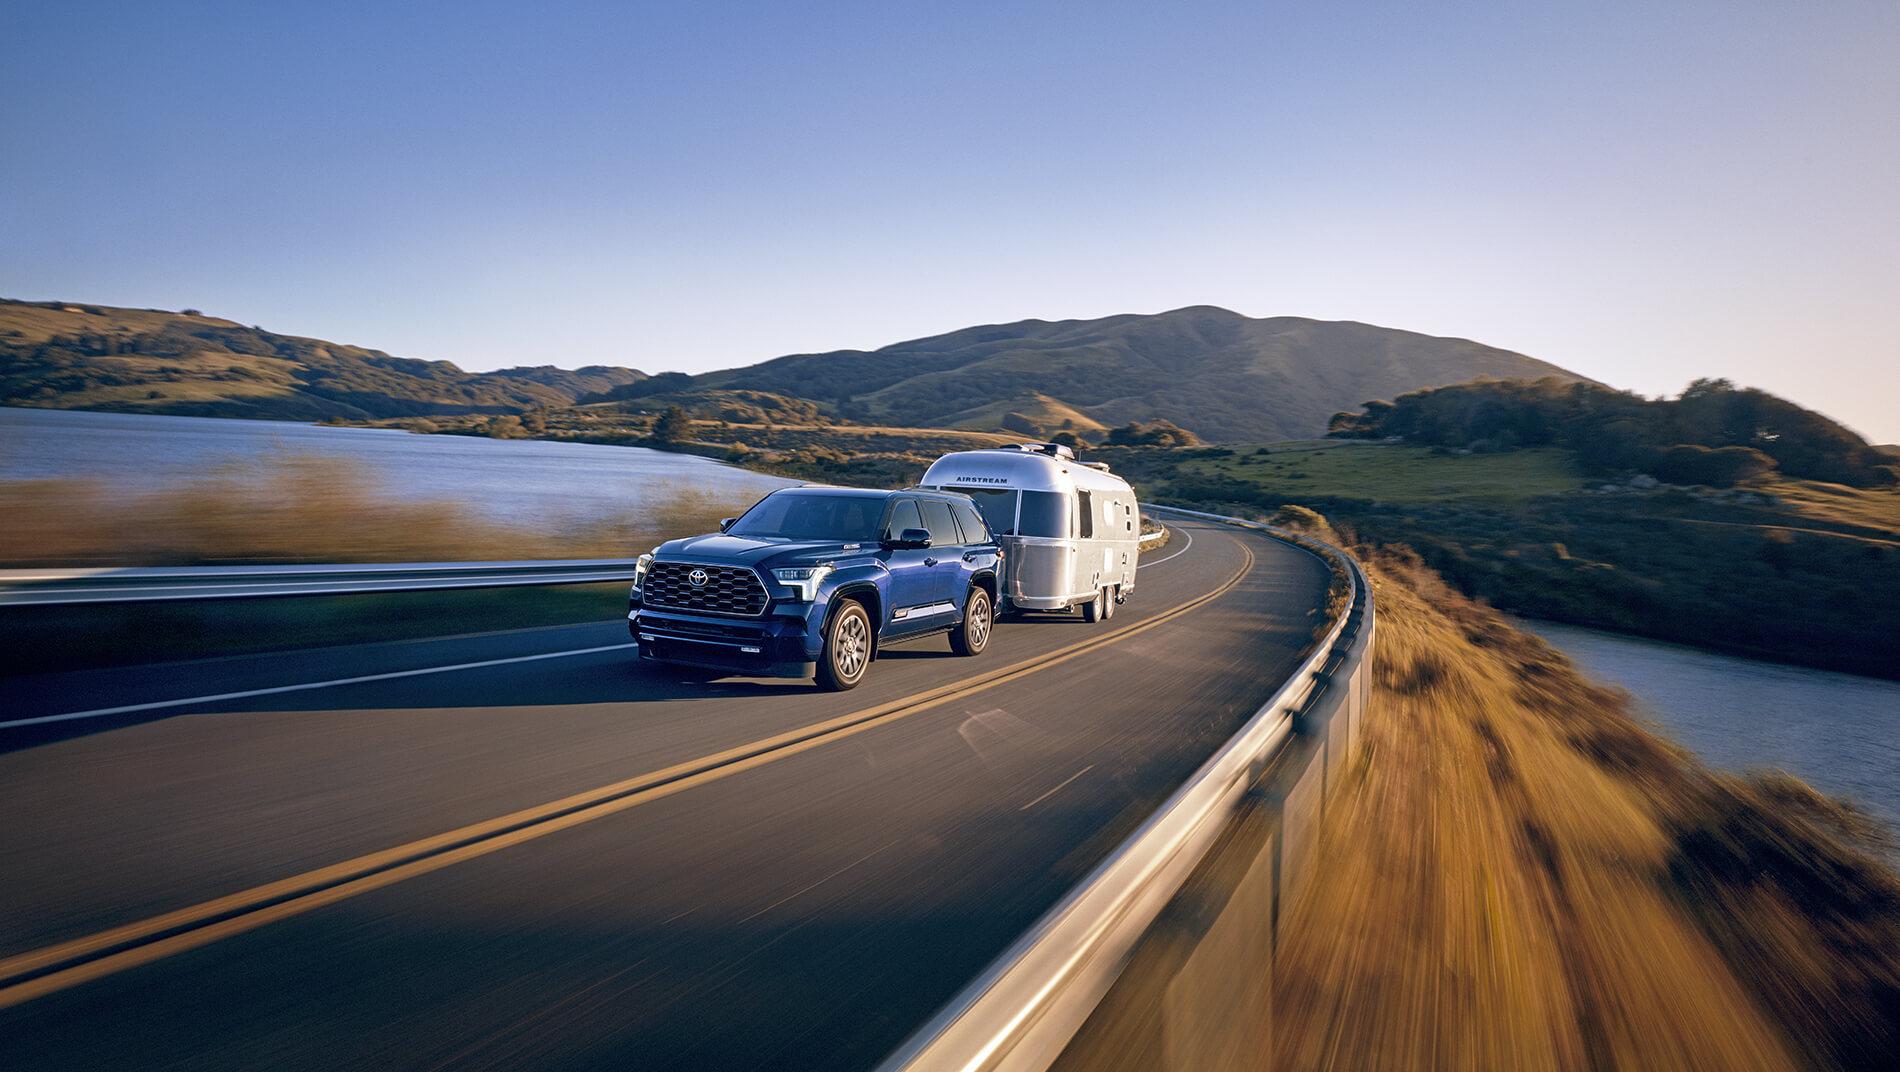 Blue Toyota Sequoia pulling a travel trailer across a mountain lake